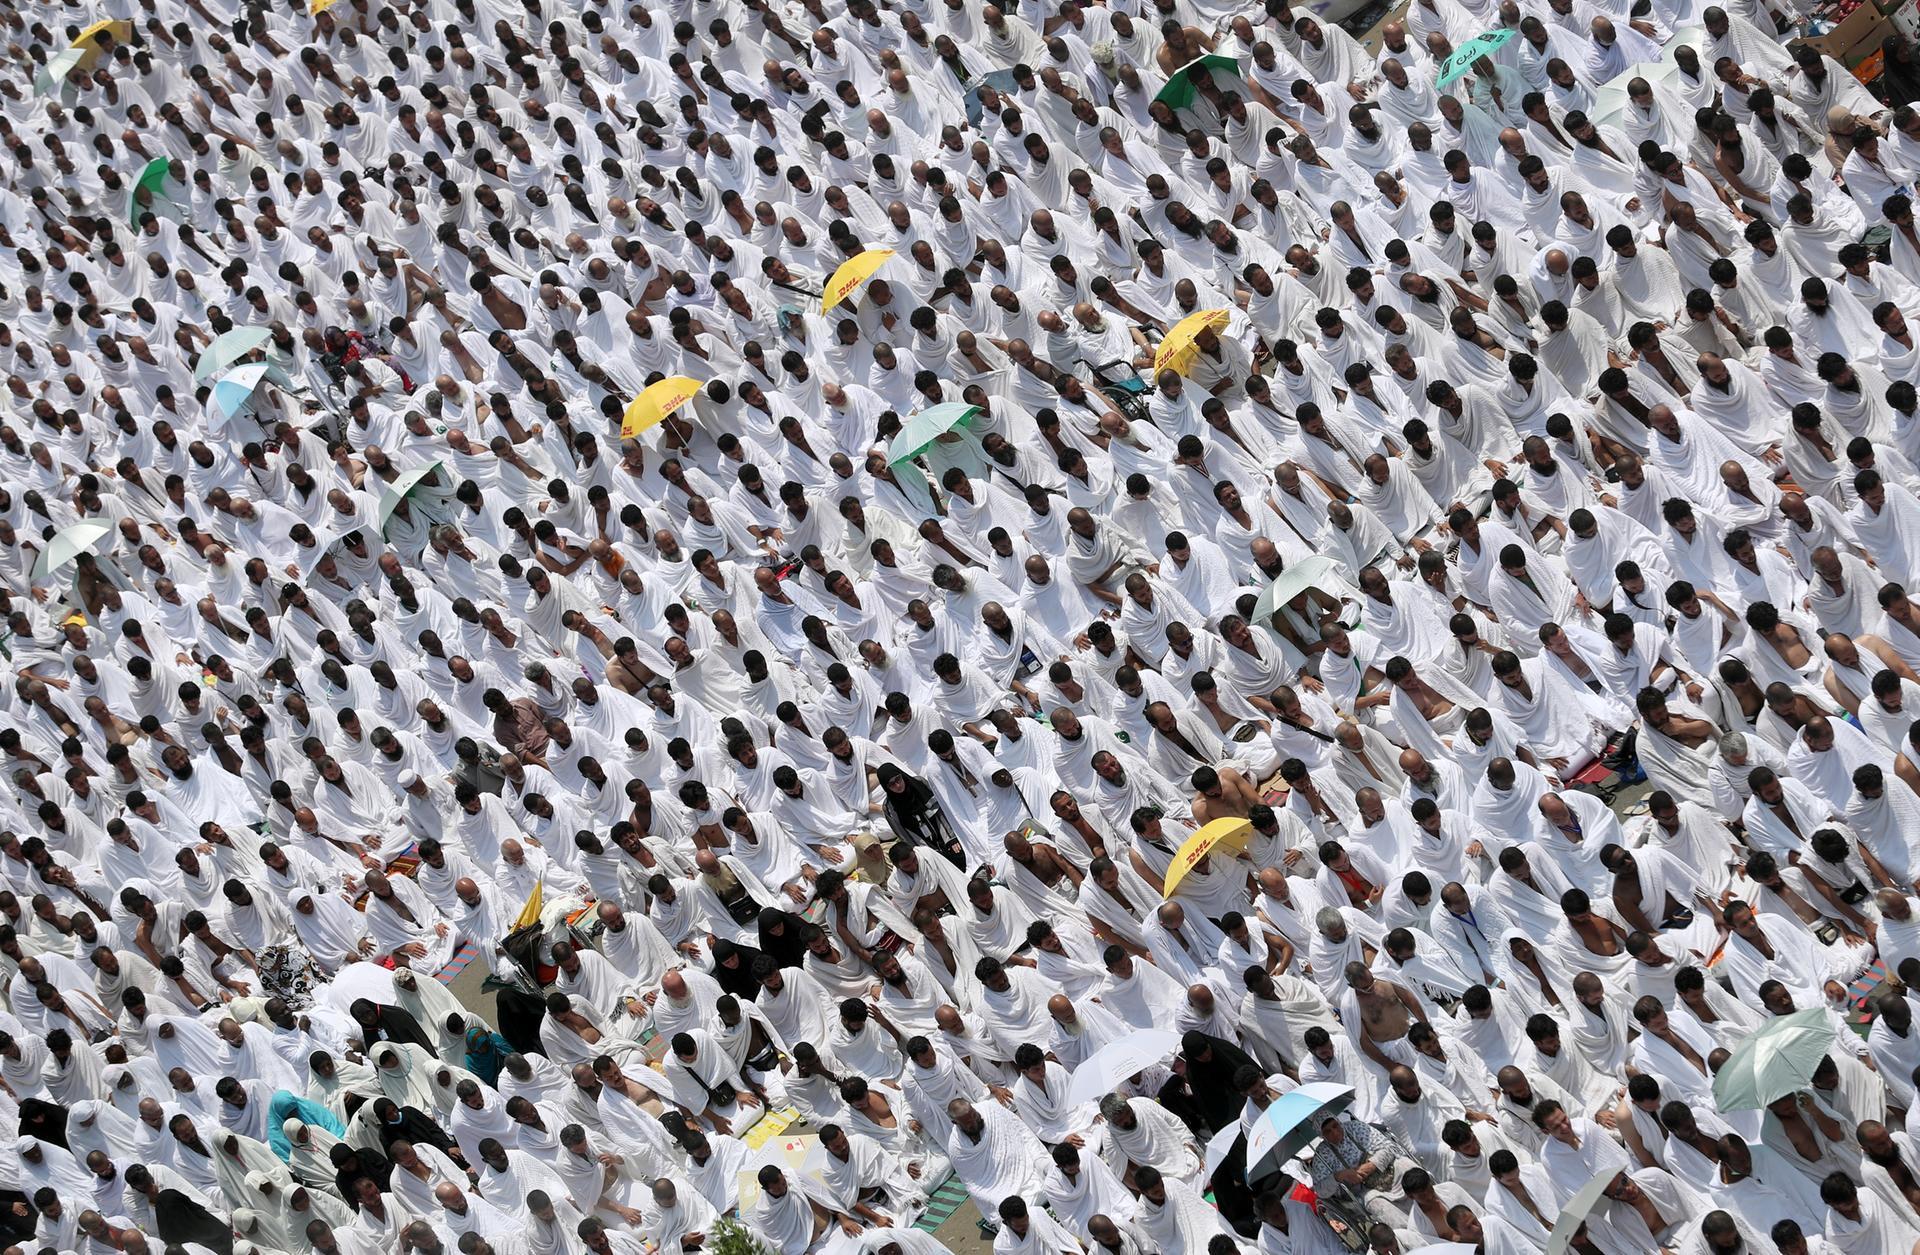 Muslim worshipers, some carrying umbrellas to protect them from the scorching sun, gather for prayer at Namirah mosque near Mount Arafat, also known as Jabal al-Rahmah (Mount of Mercy), where the Prophet Mohammed is believed to have given his final sermon, on August 31, 2017, ahead of the climax of hajj. Clad in white, their the palms facing the sky, some two million Muslims from around the world gathered on Saudi Arabia's Mount Arafat for the highlight of the hajj pilgrimage. / AFP PHOTO / KARIM SAHIB